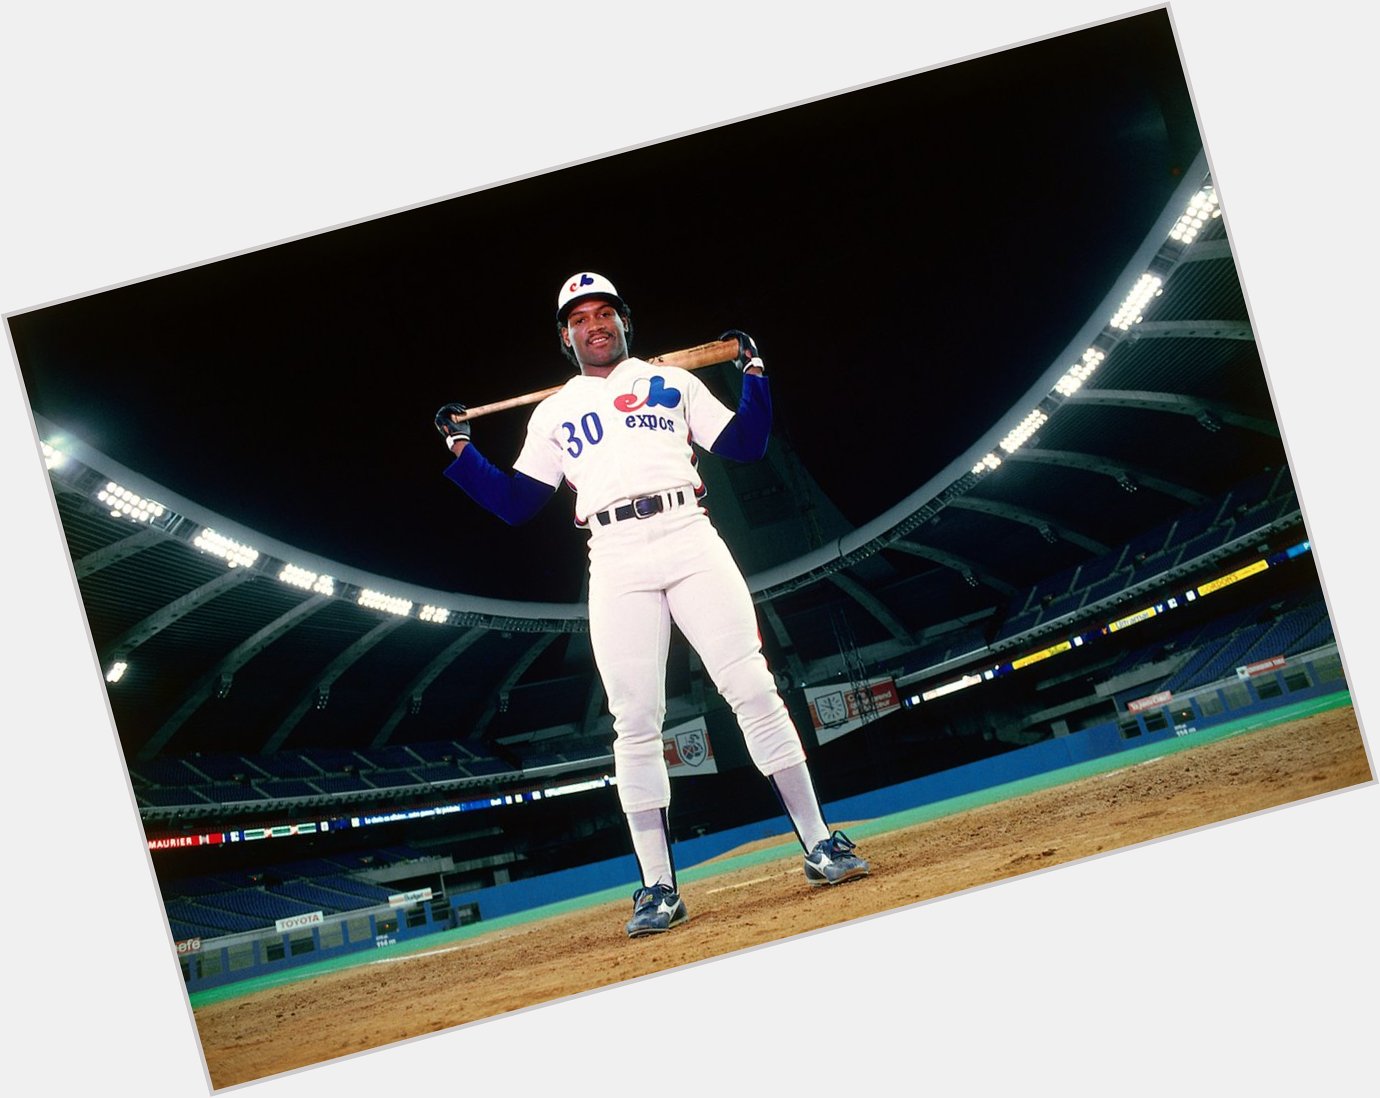 A couple of big Happy Birthday\s to two Hall of Famers: Tim Raines & Robin Yount!  